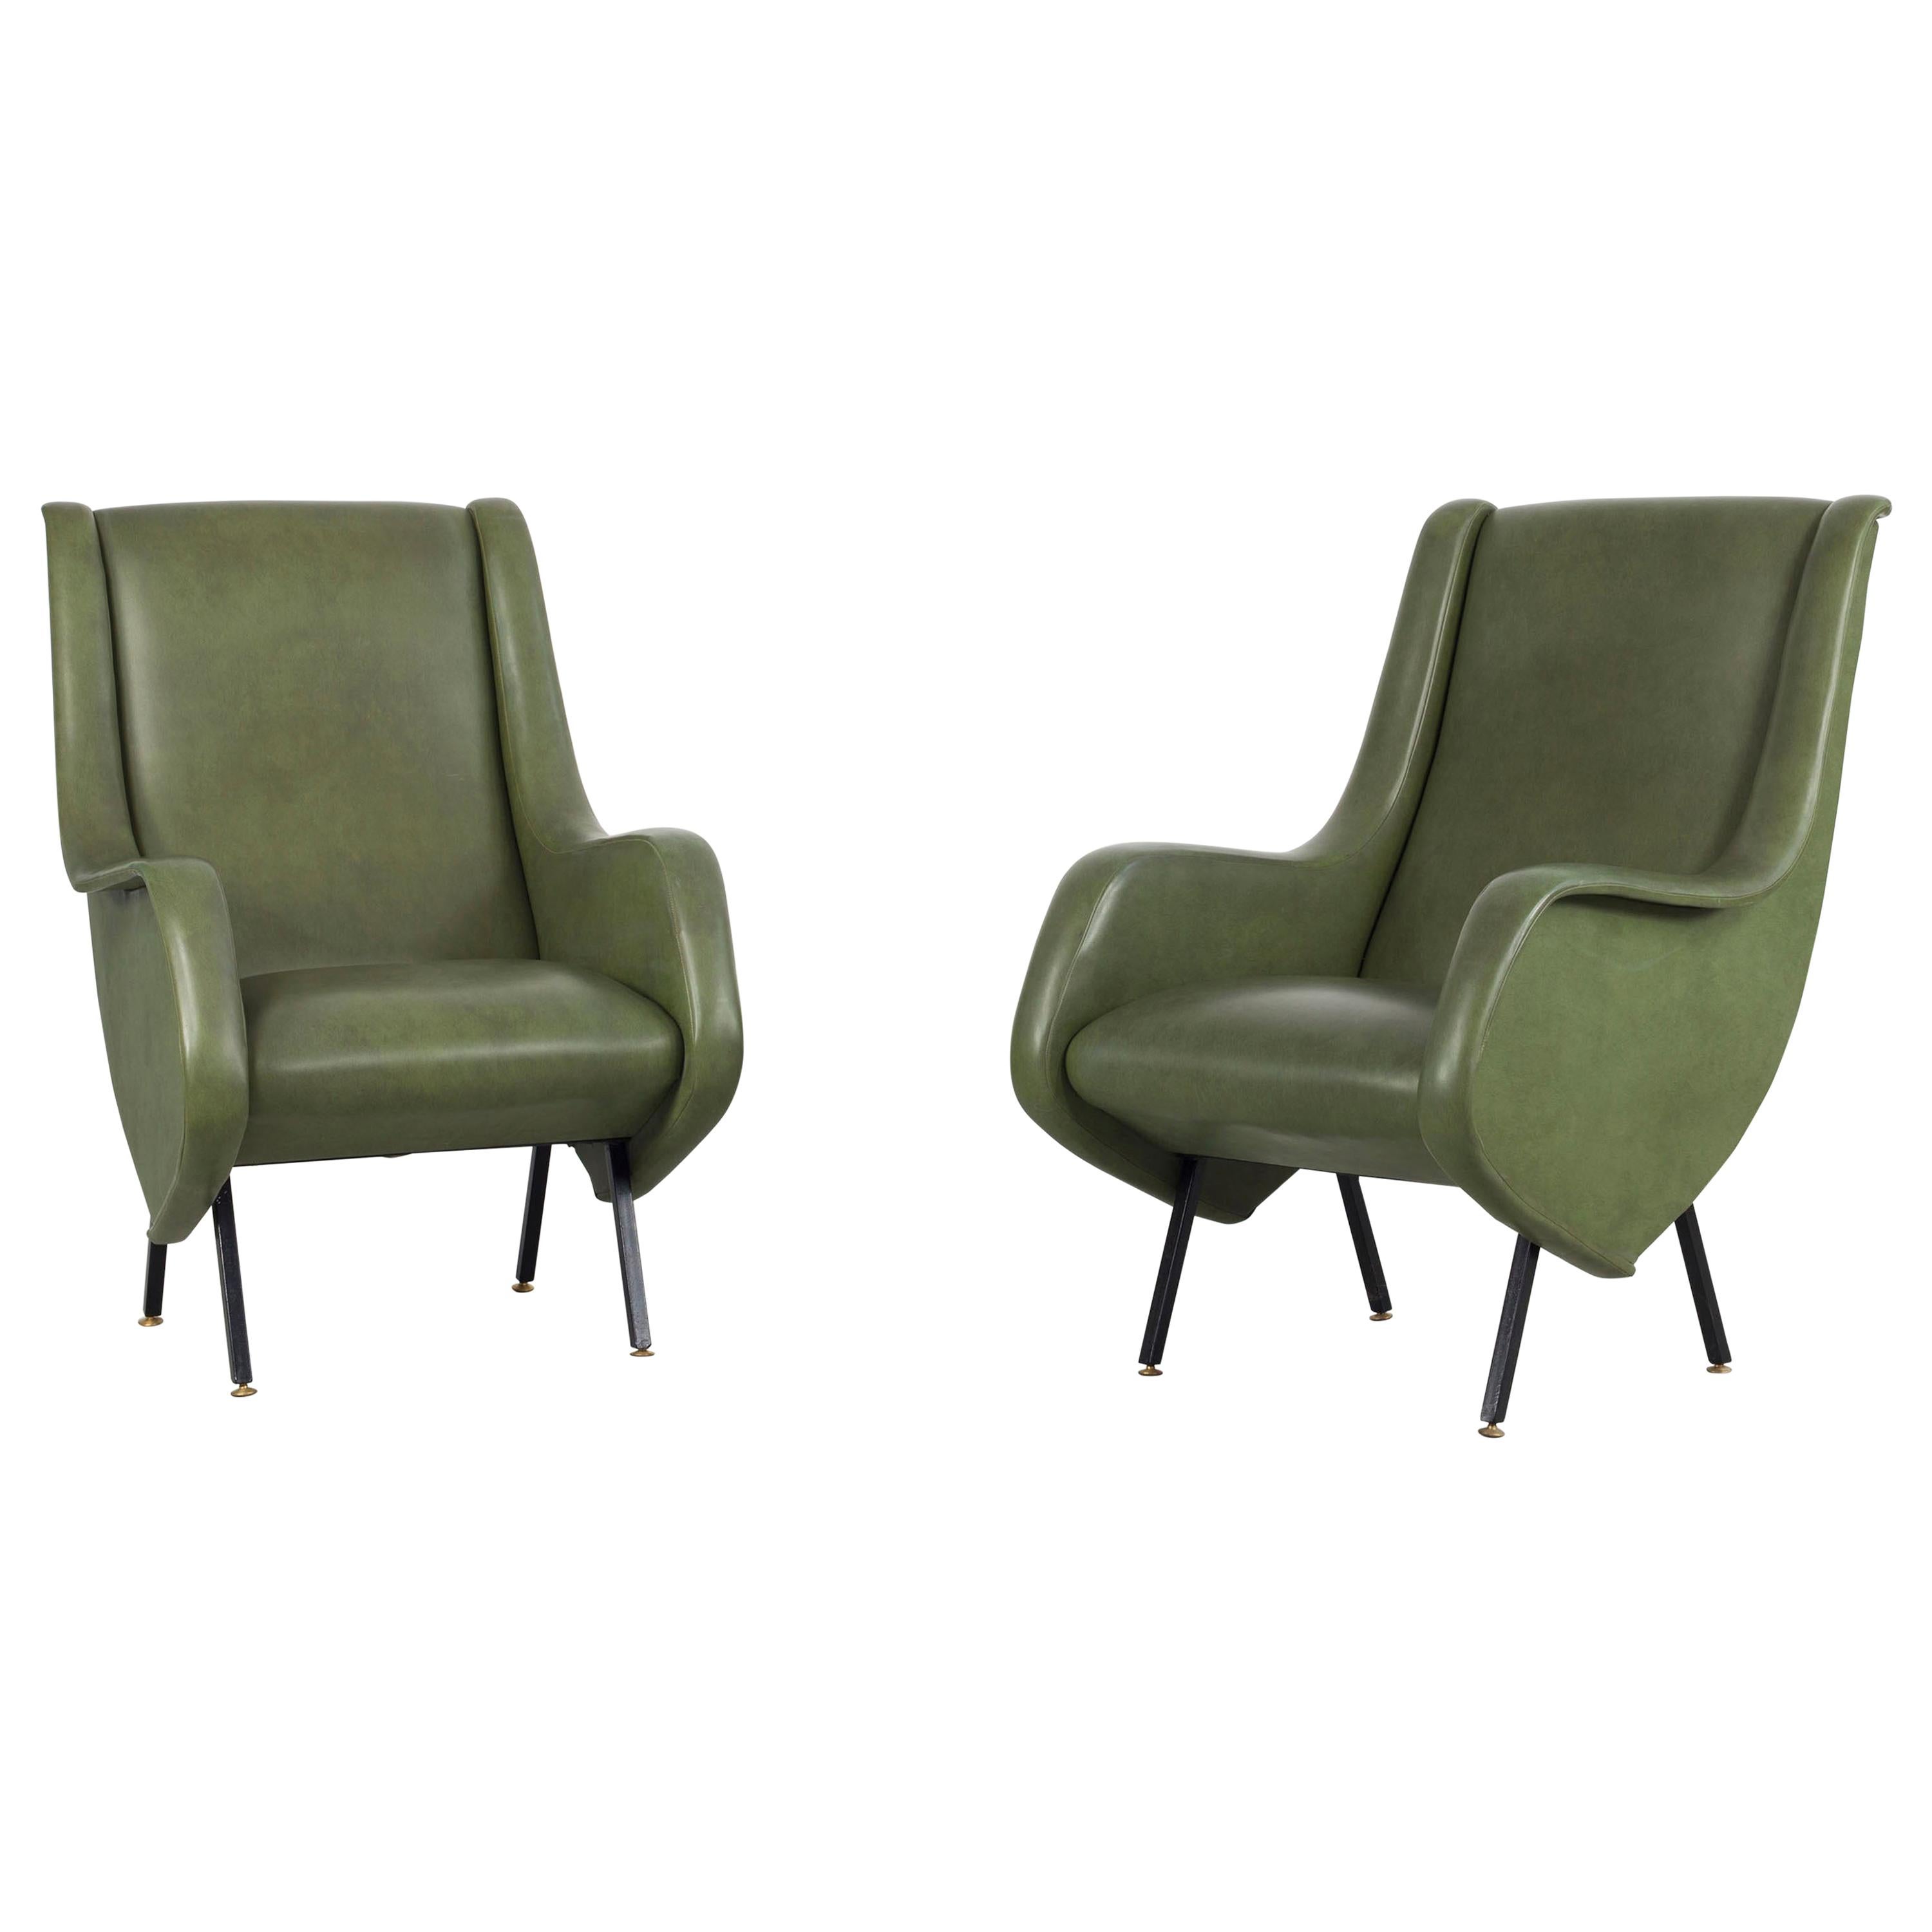 Pair of Italian Midcentury Armchairs in Original Green Fauxleather, 1950s For Sale